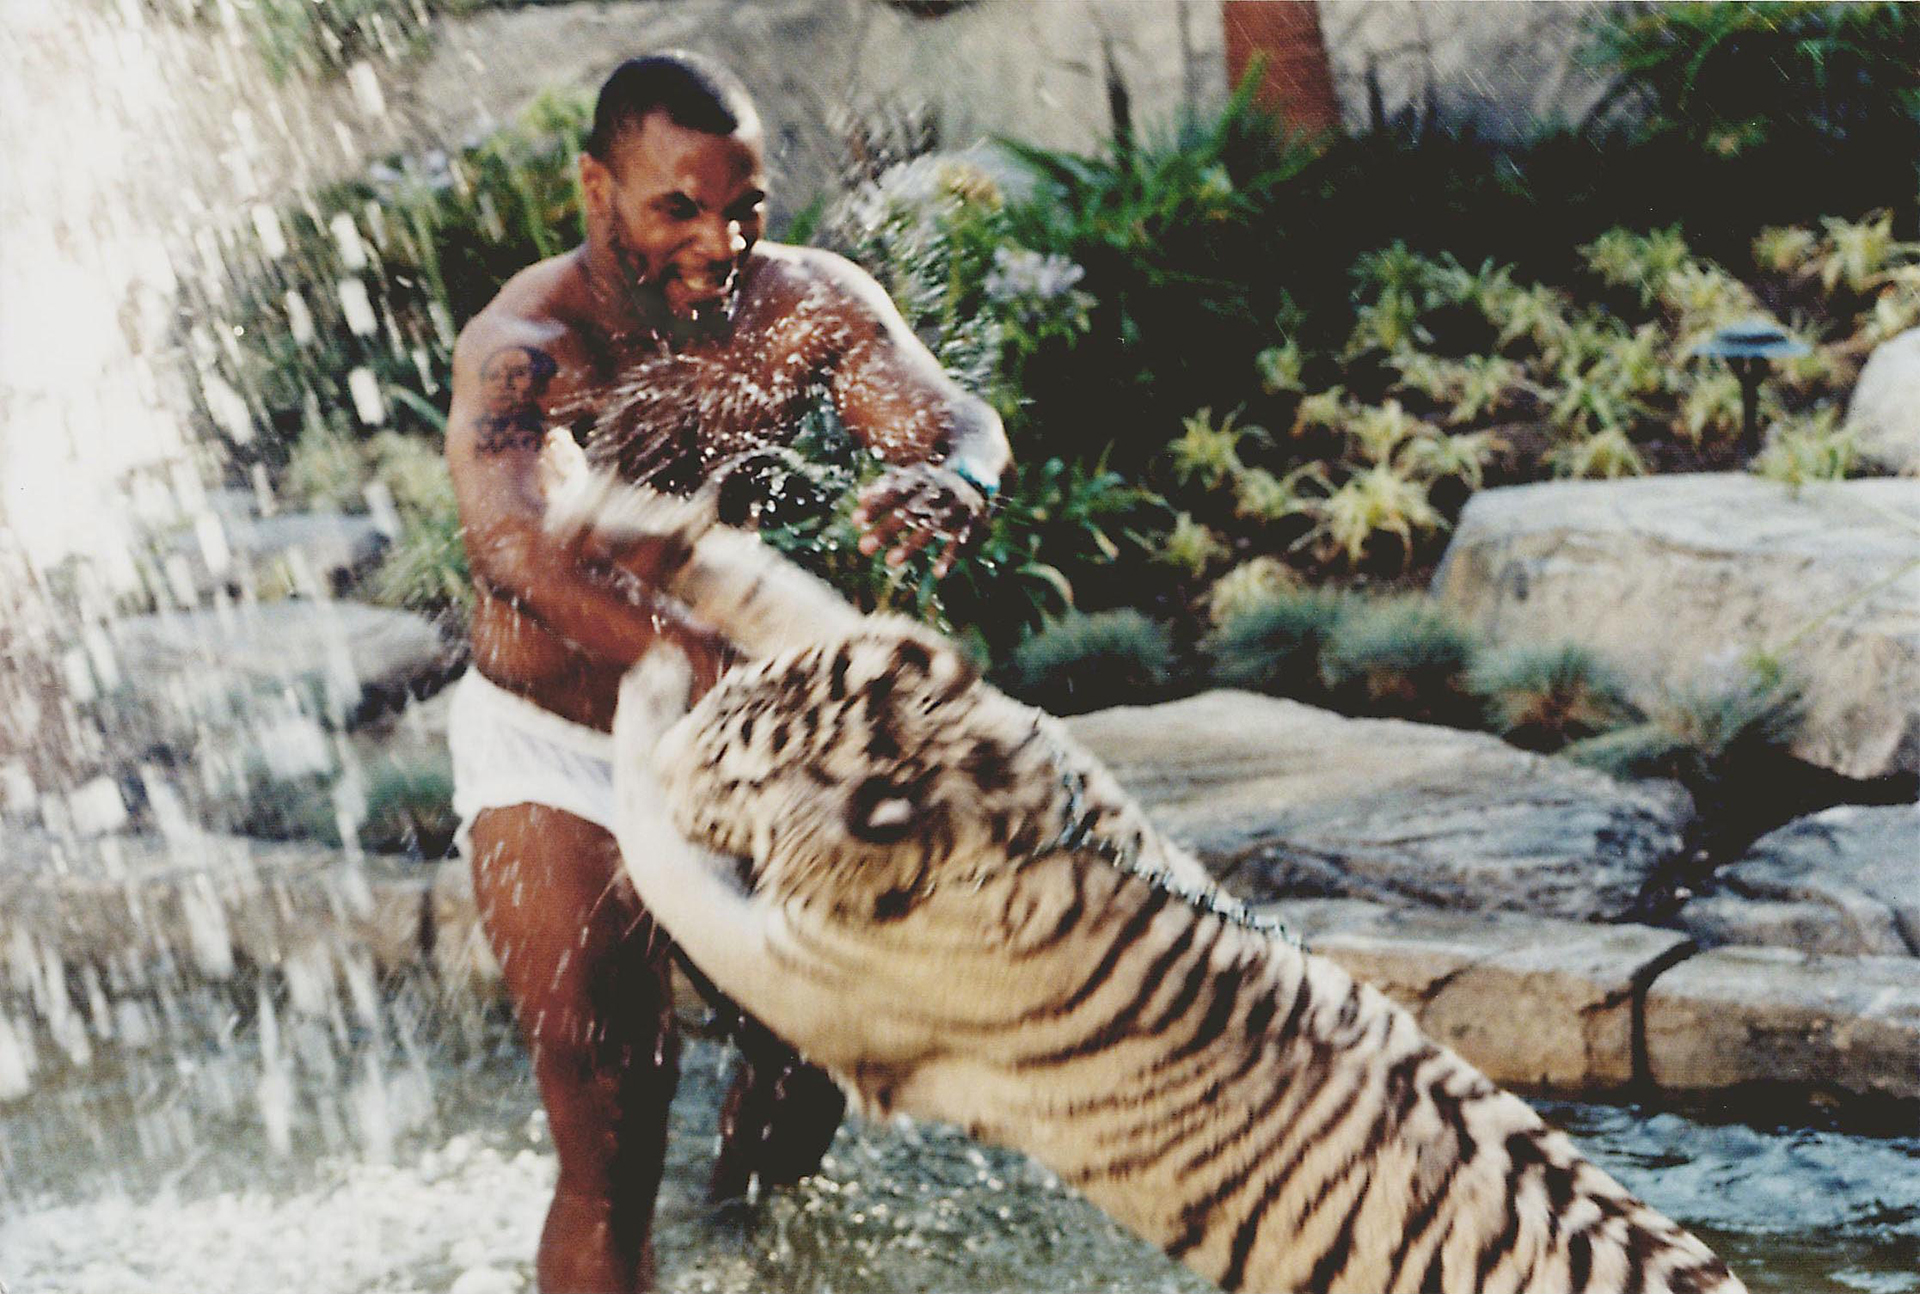 Photo © 2019 REX Features/Shutterstock /The Grosby GroupMIKE TYSON PLAYING WITH PET TIGERMIKE TYSON PLAYING WITH PET TIGER, LOS ANGELES, AMERICA  - 1996